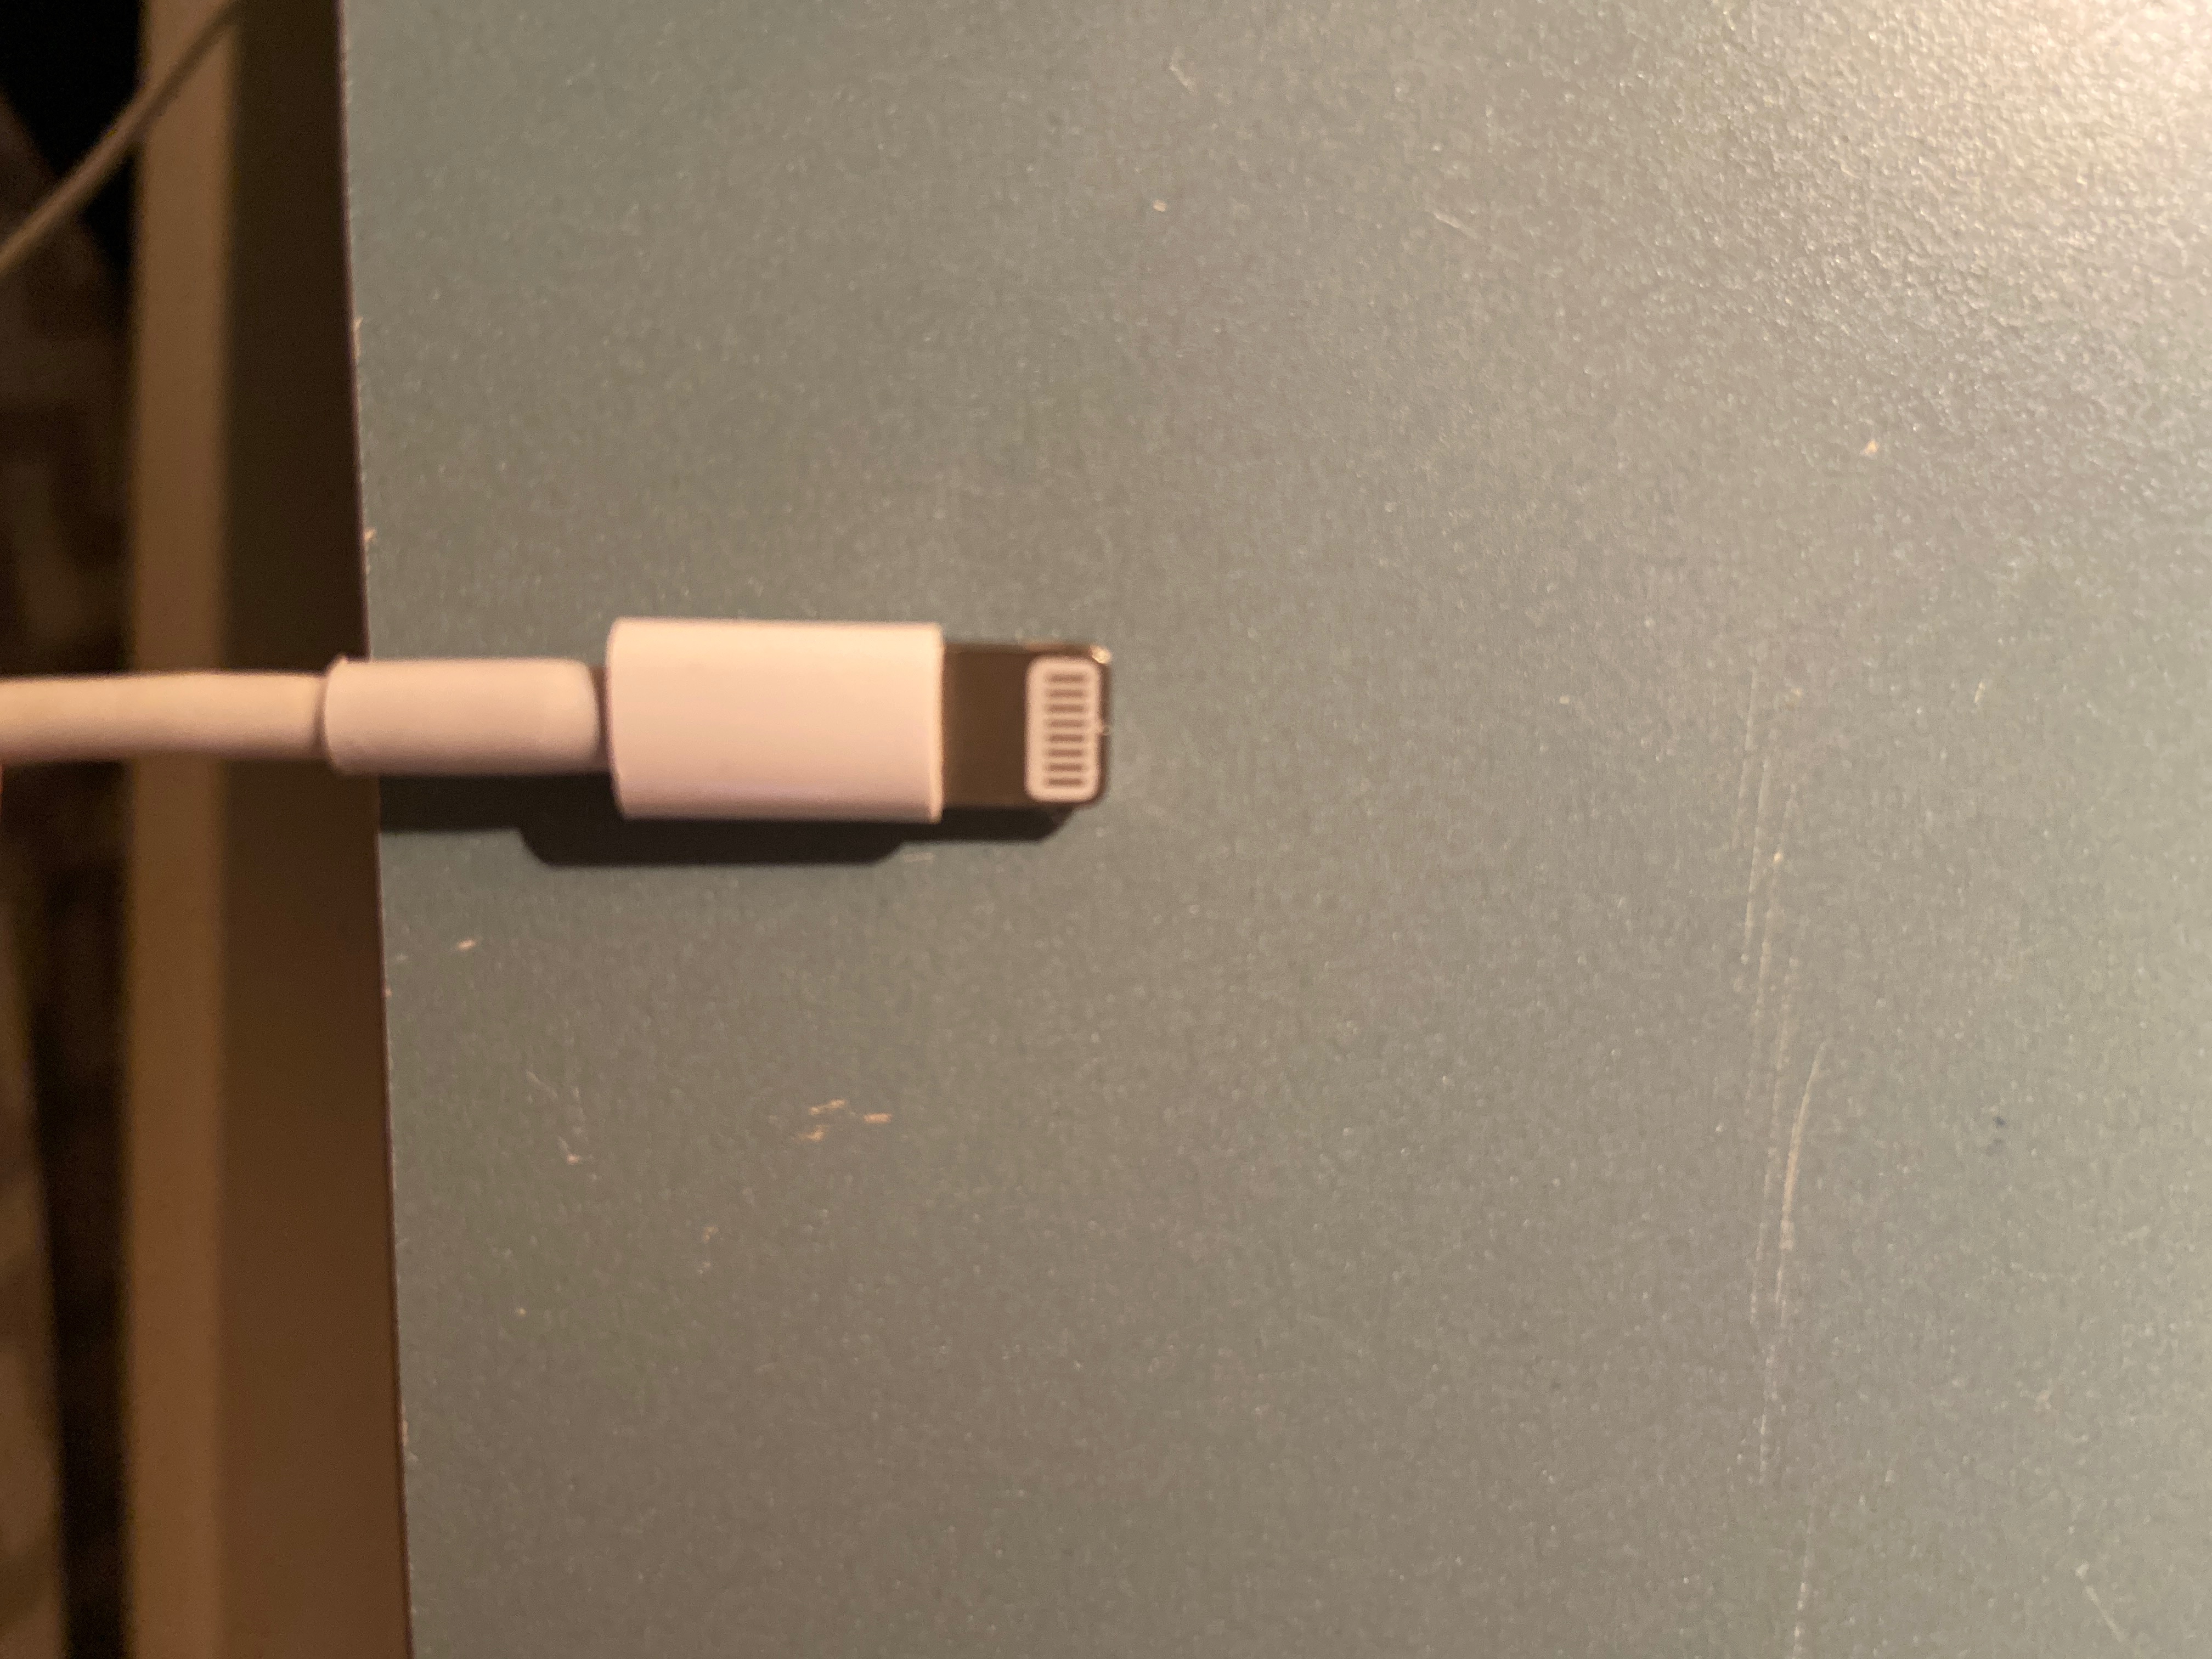 My charger suddenly stopped working - Apple Community